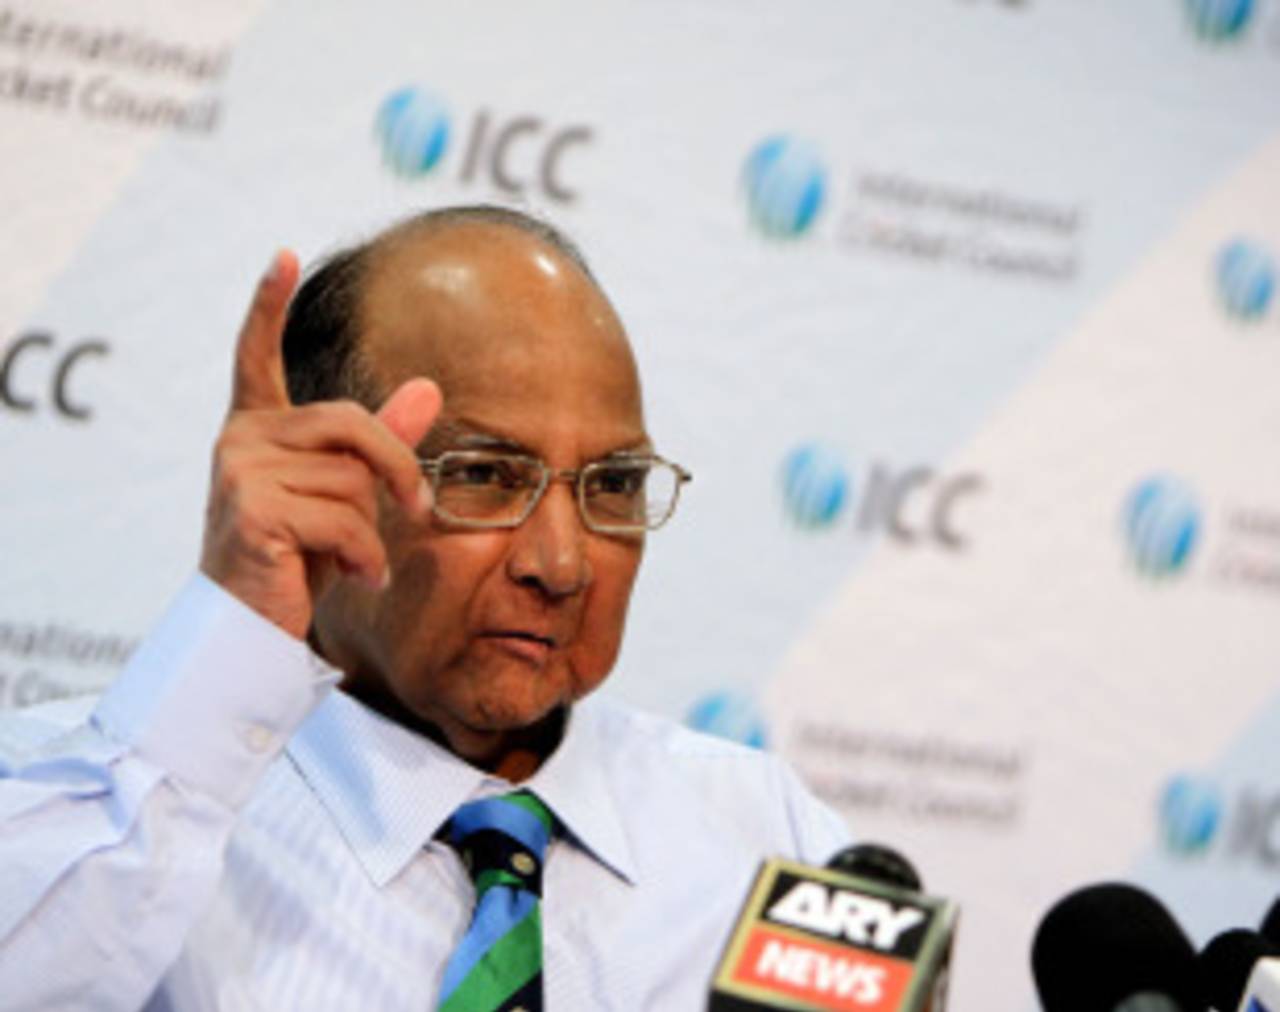 Sharad Pawar has returned to cricket administration after a two-year hiatus&nbsp;&nbsp;&bull;&nbsp;&nbsp;AFP